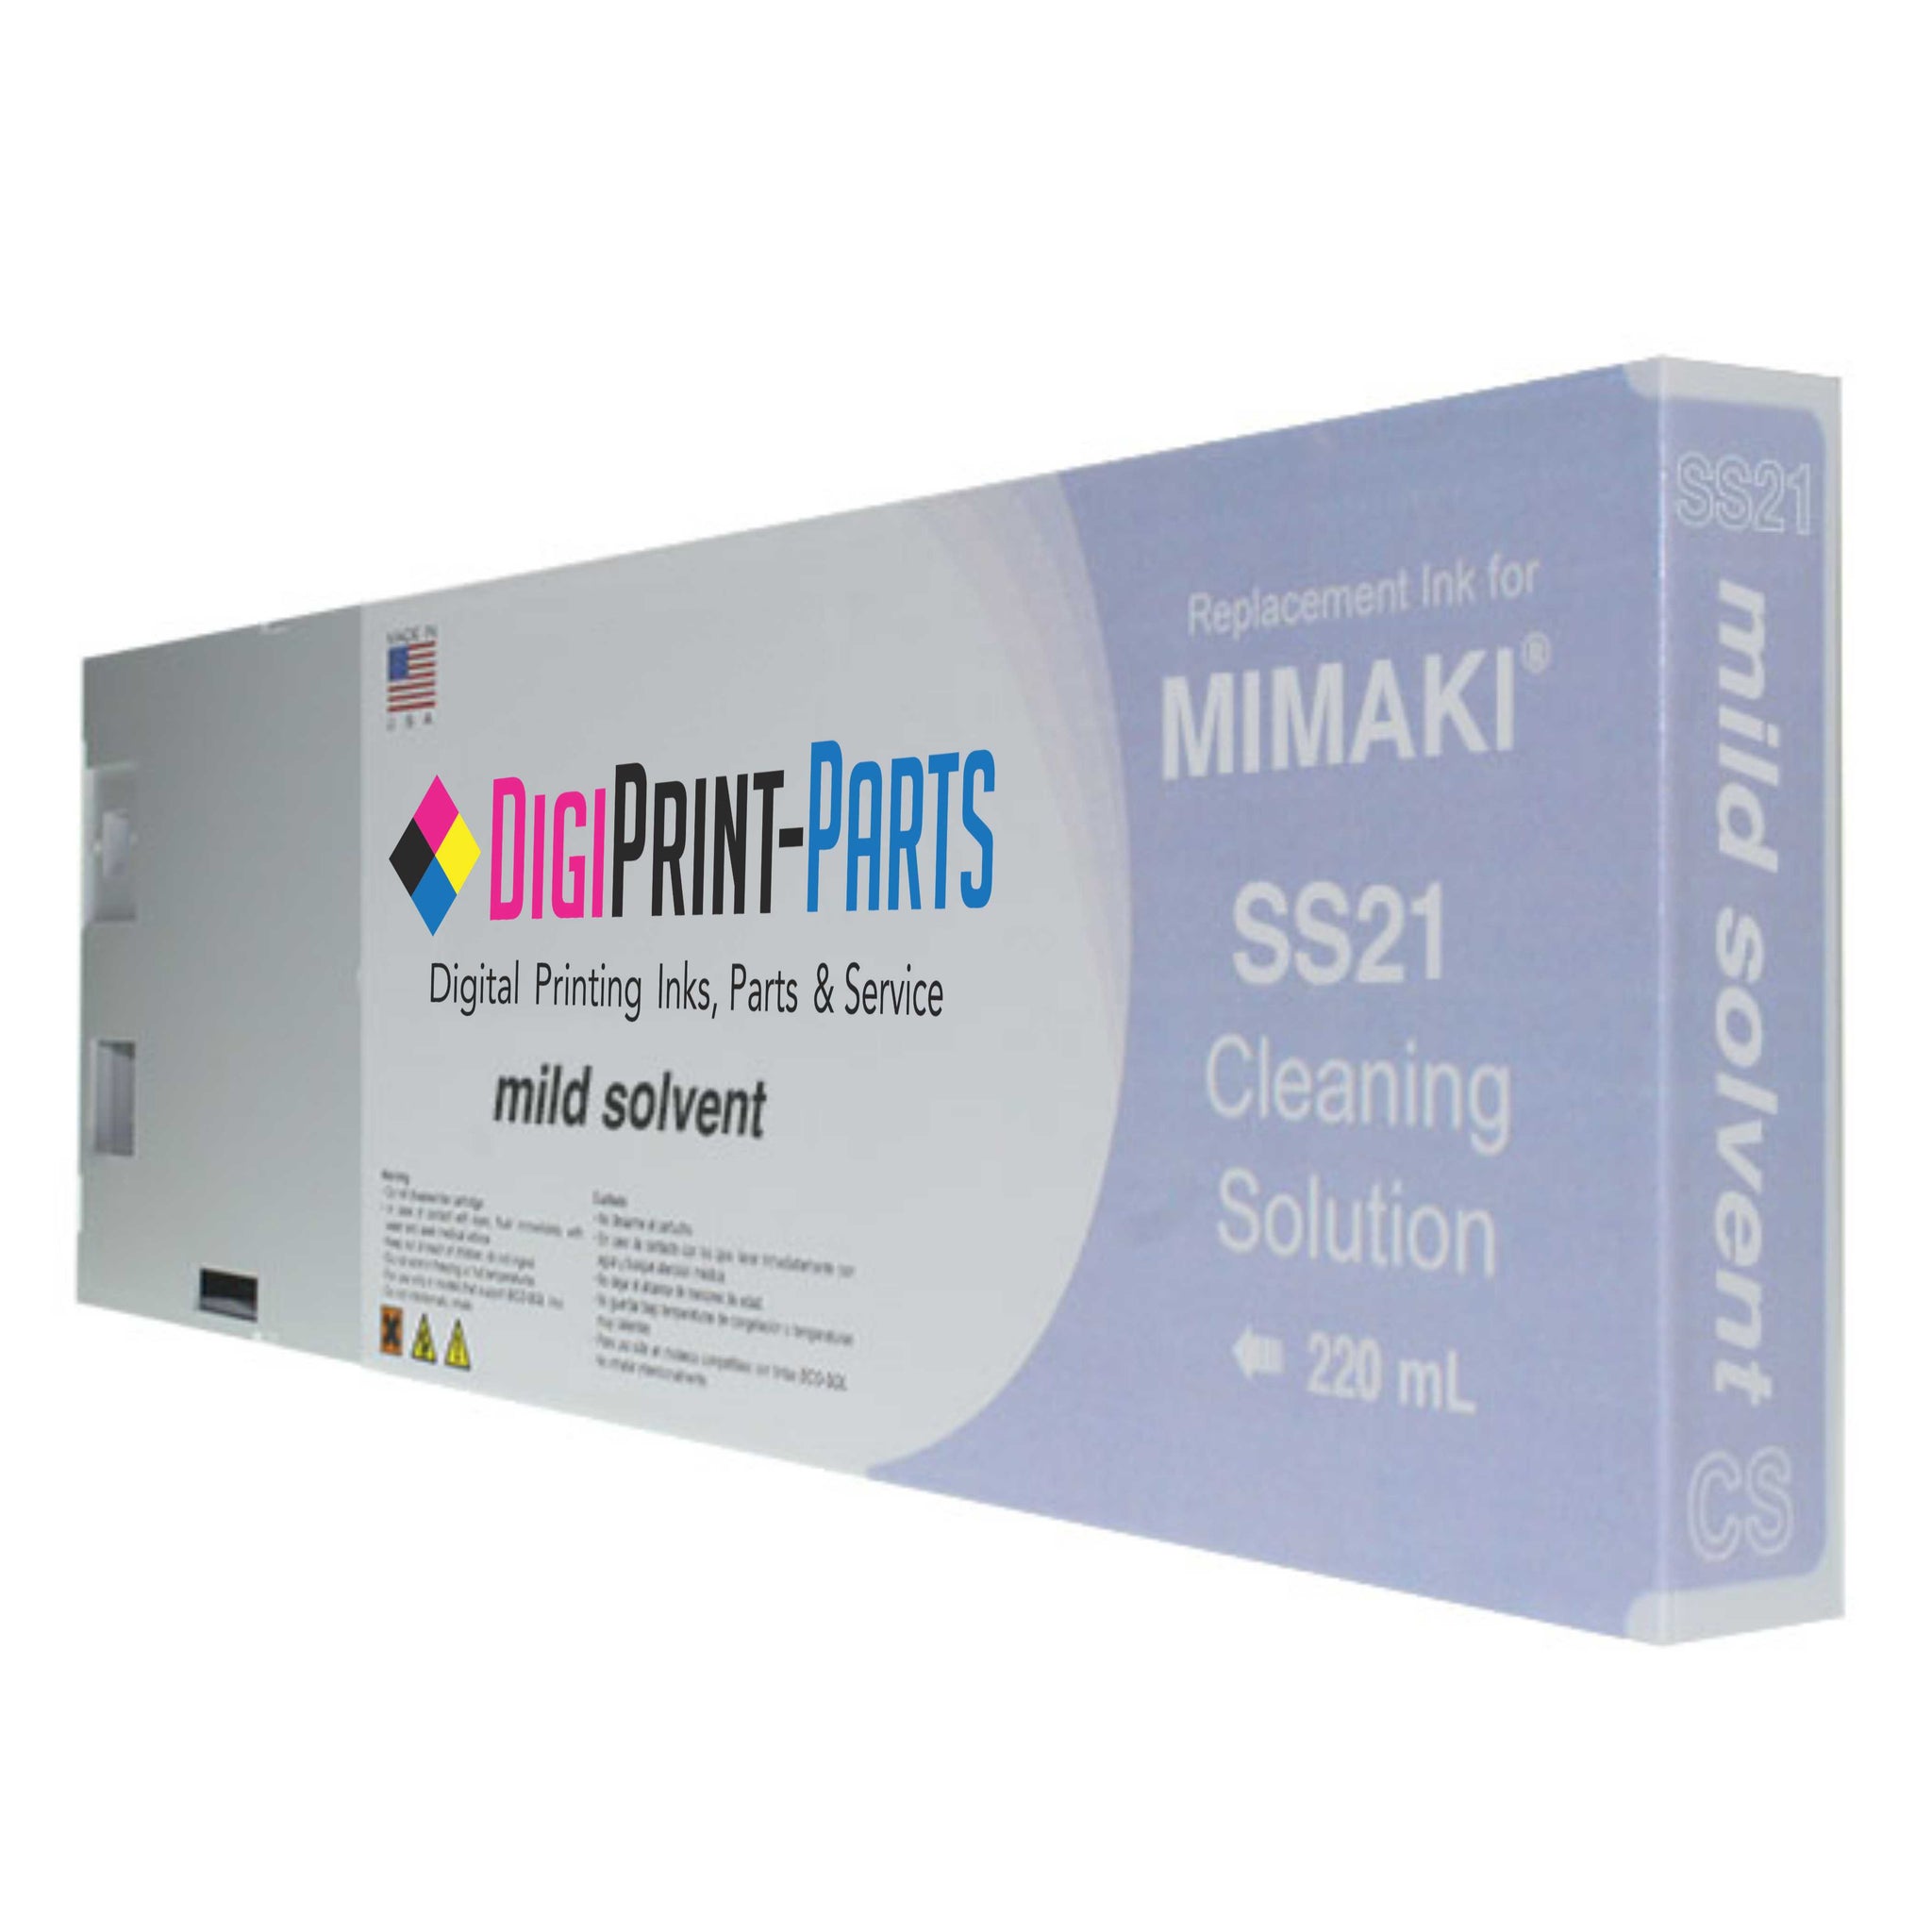 Cleaning Solution Cartridge Mimaki Solvent SS21 220ml